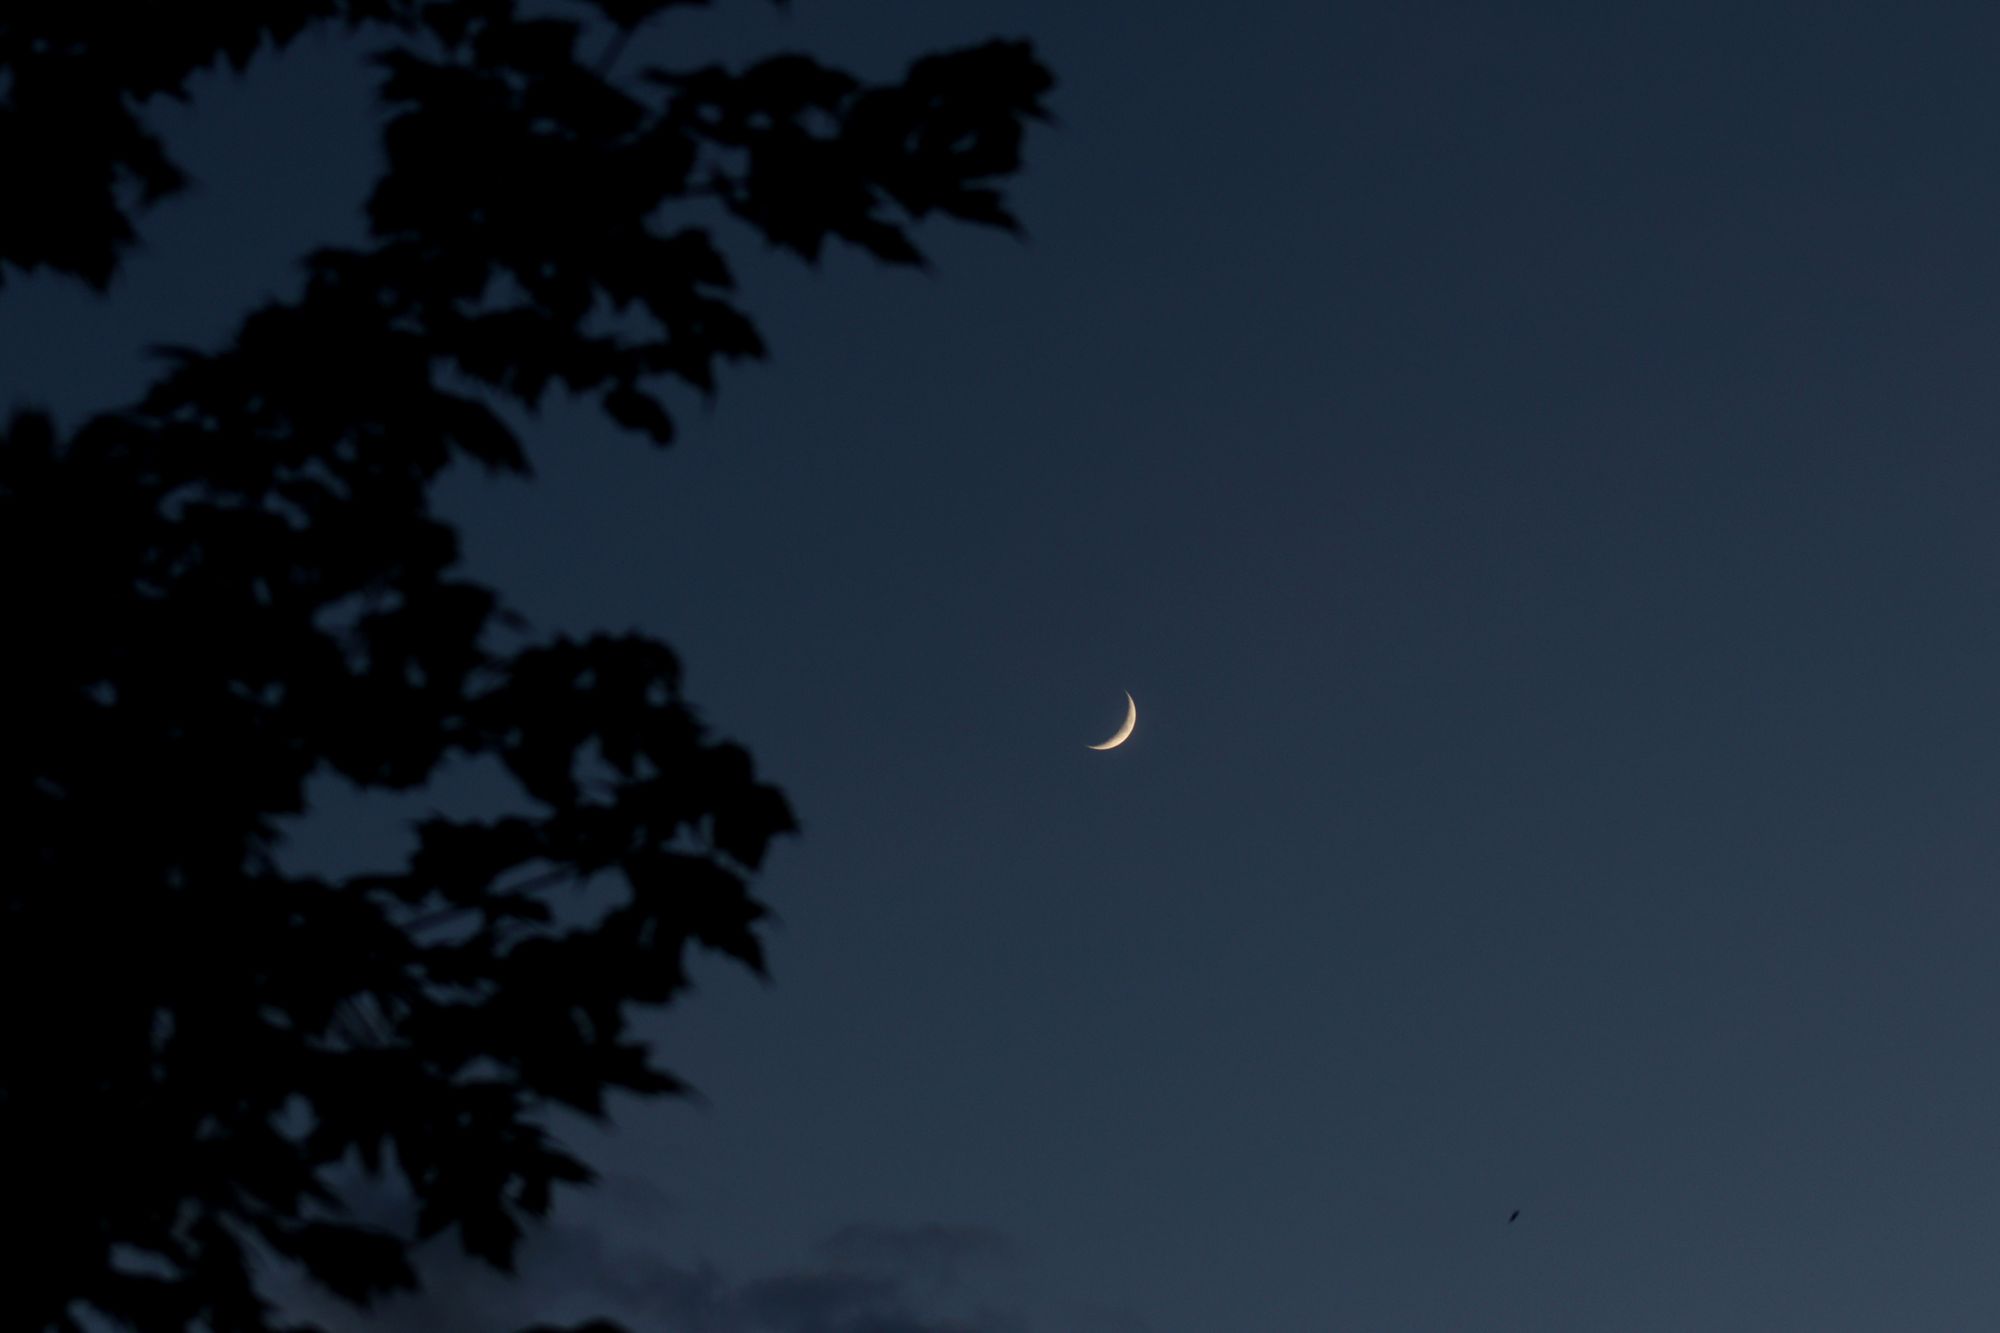 Clouds vs. Early Crescent Moon